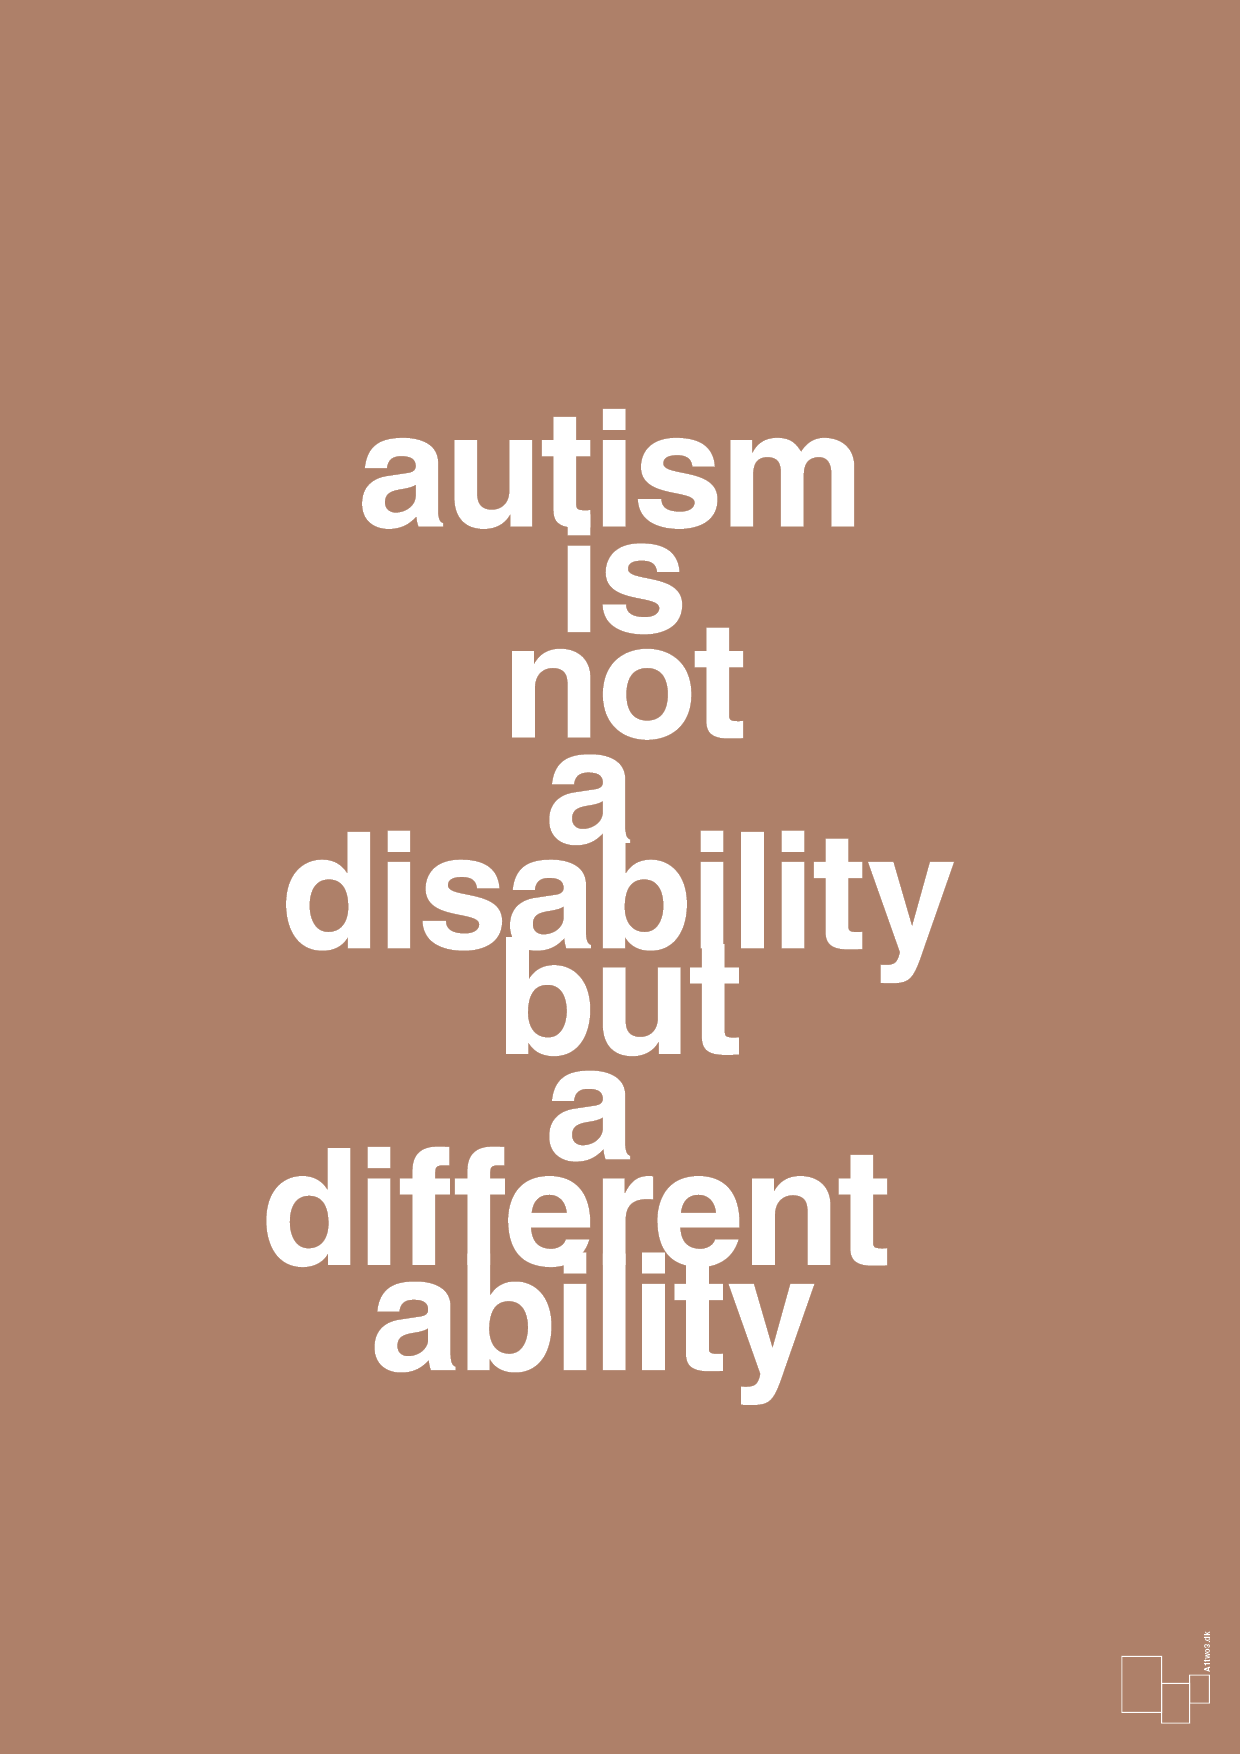 autism is not a disability but a different ability - Plakat med Samfund i Cider Spice